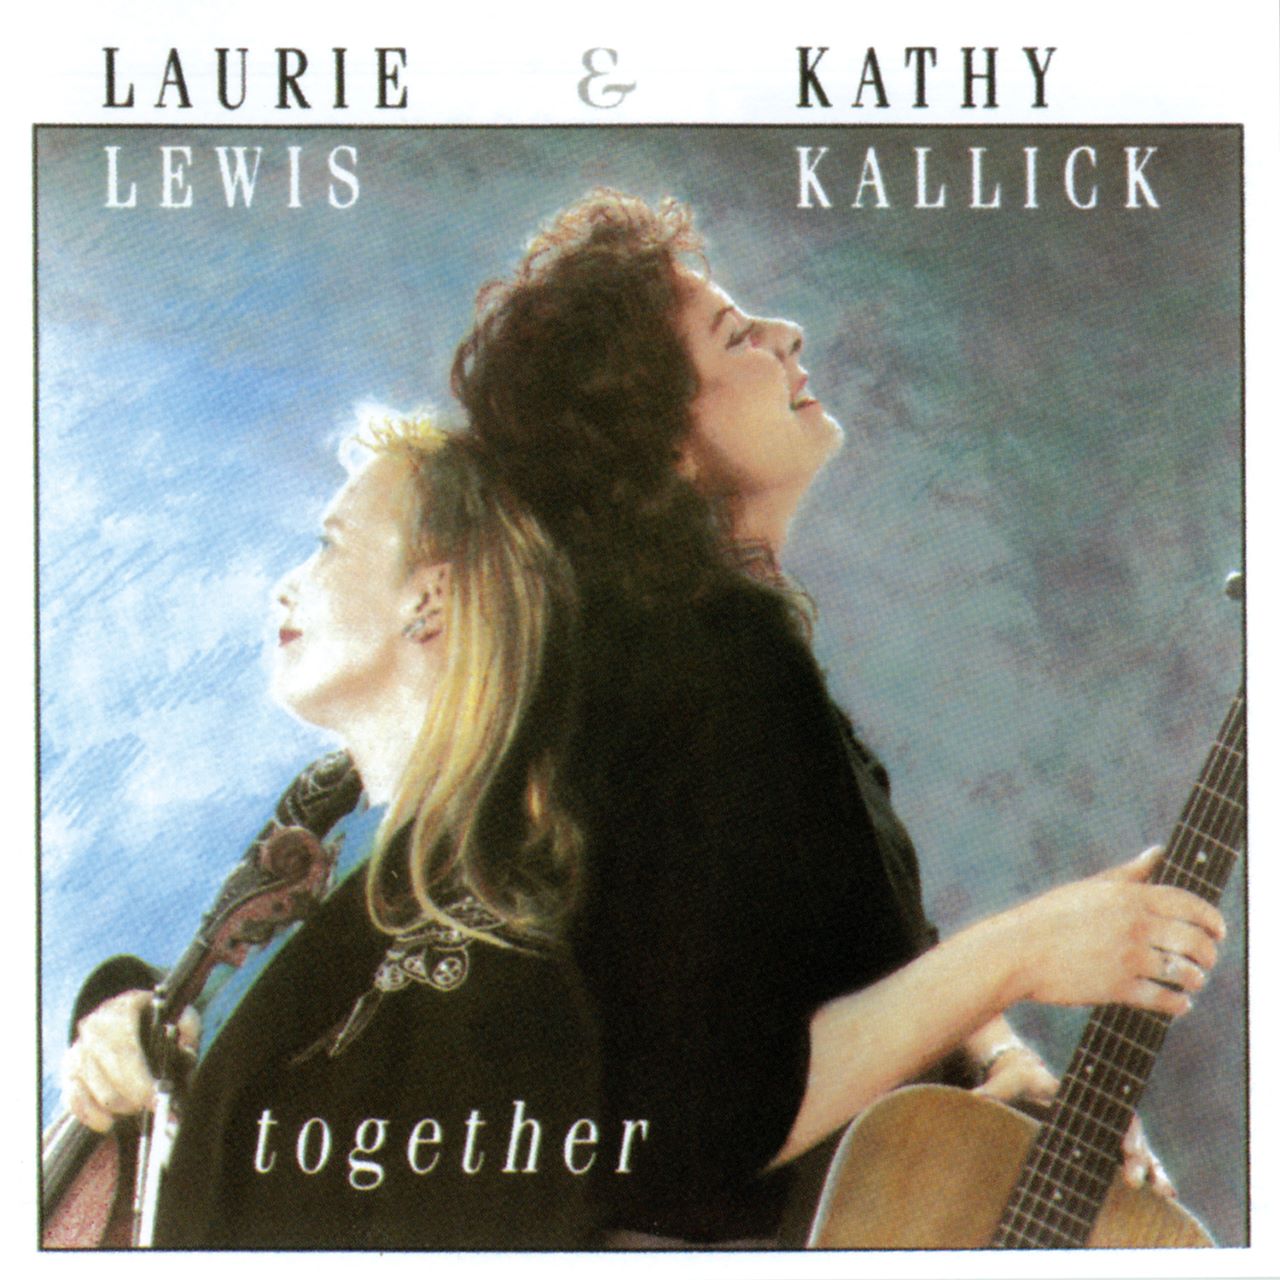 Laurie Lewis & Kathy Kallick - Together cover album